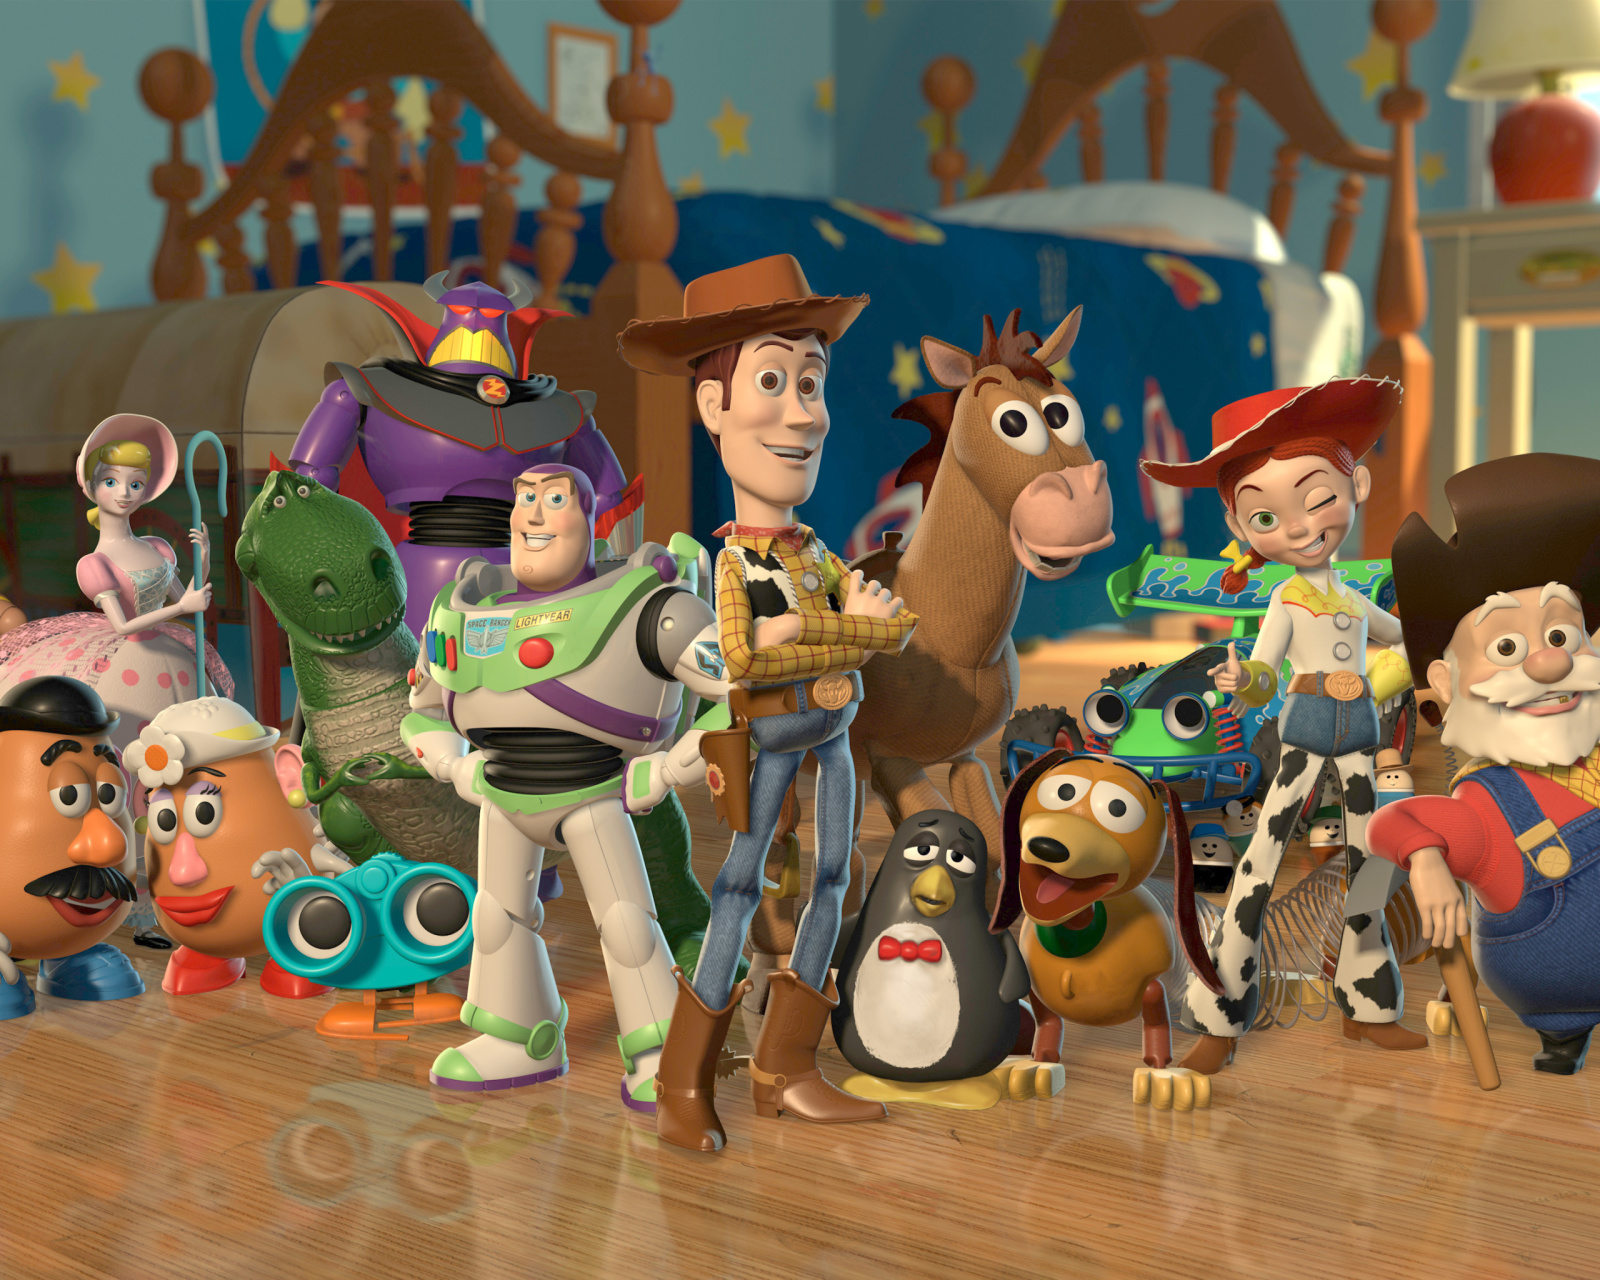 Toy Story wallpaper 1600x1280